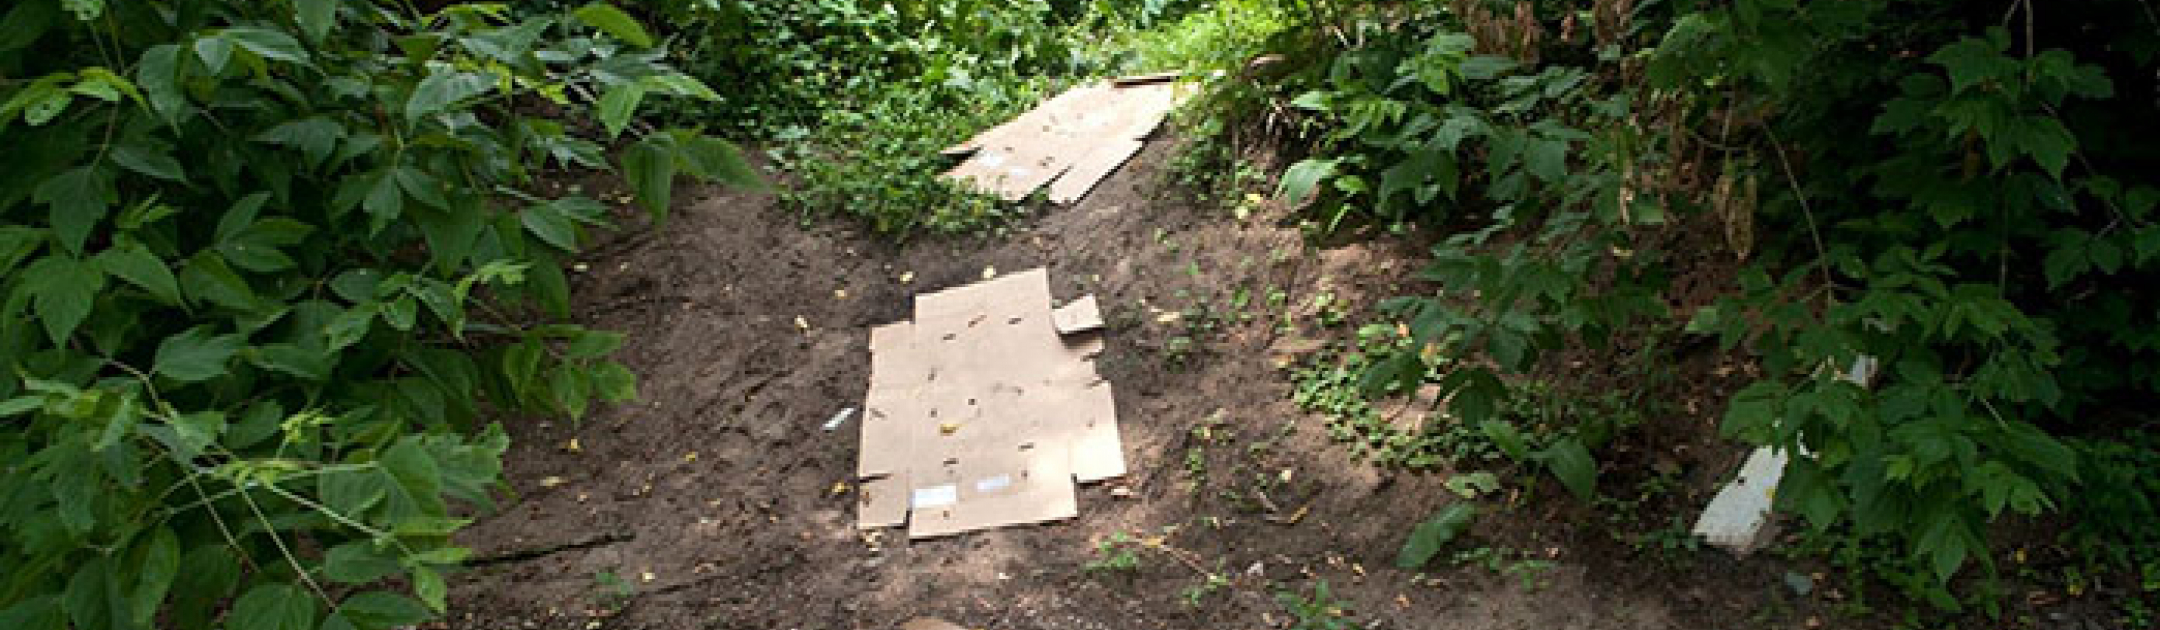 Wooded area with cardboard on the ground in a path 